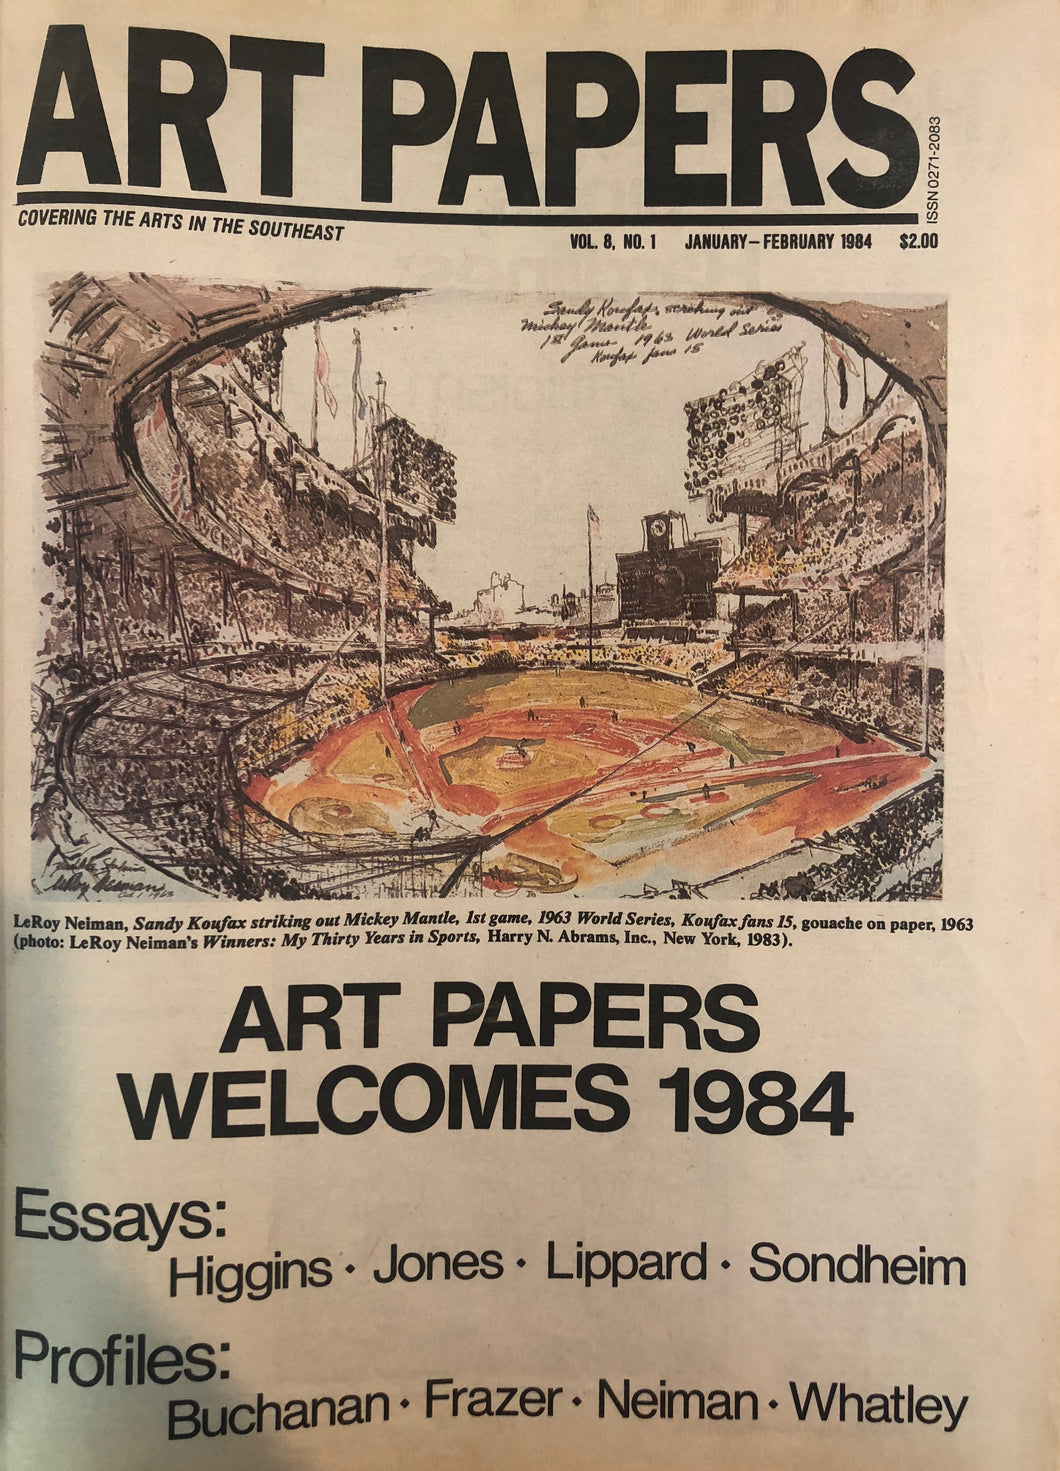 ART PAPERS 08.01 - Jan/Feb 1984 - SOLD OUT